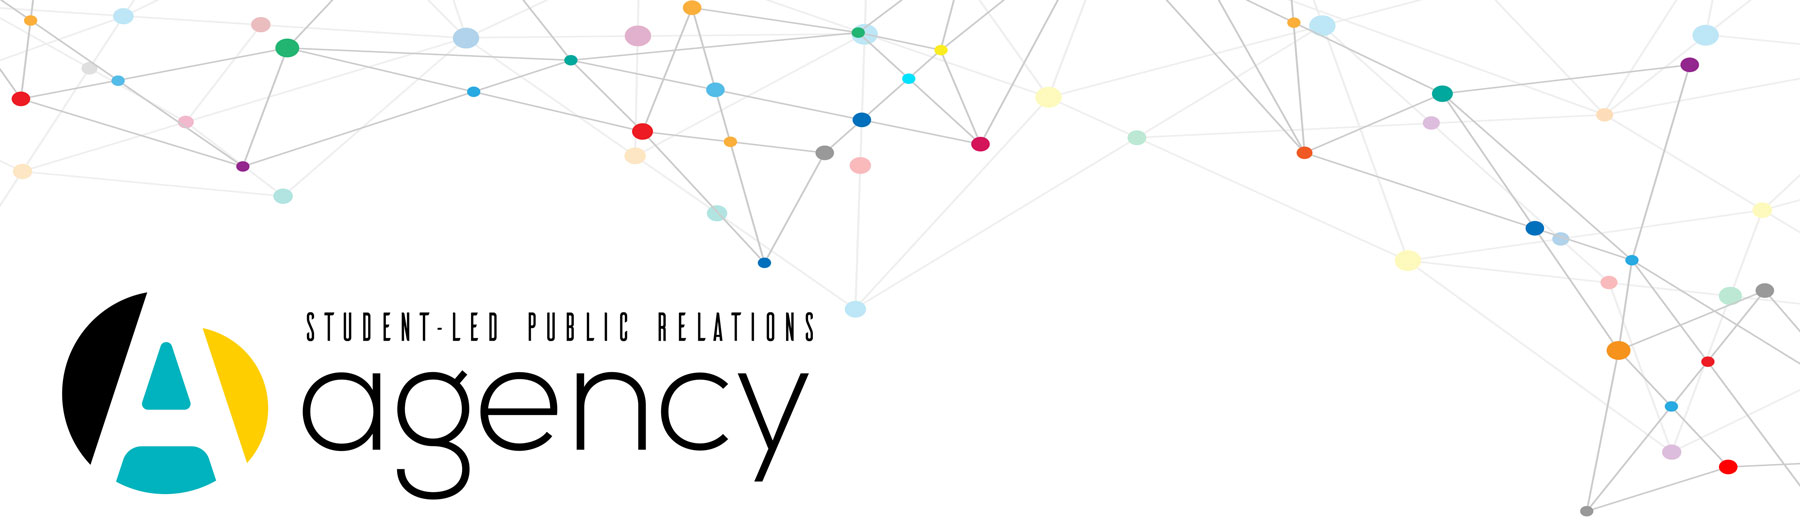 student-led public relations agency